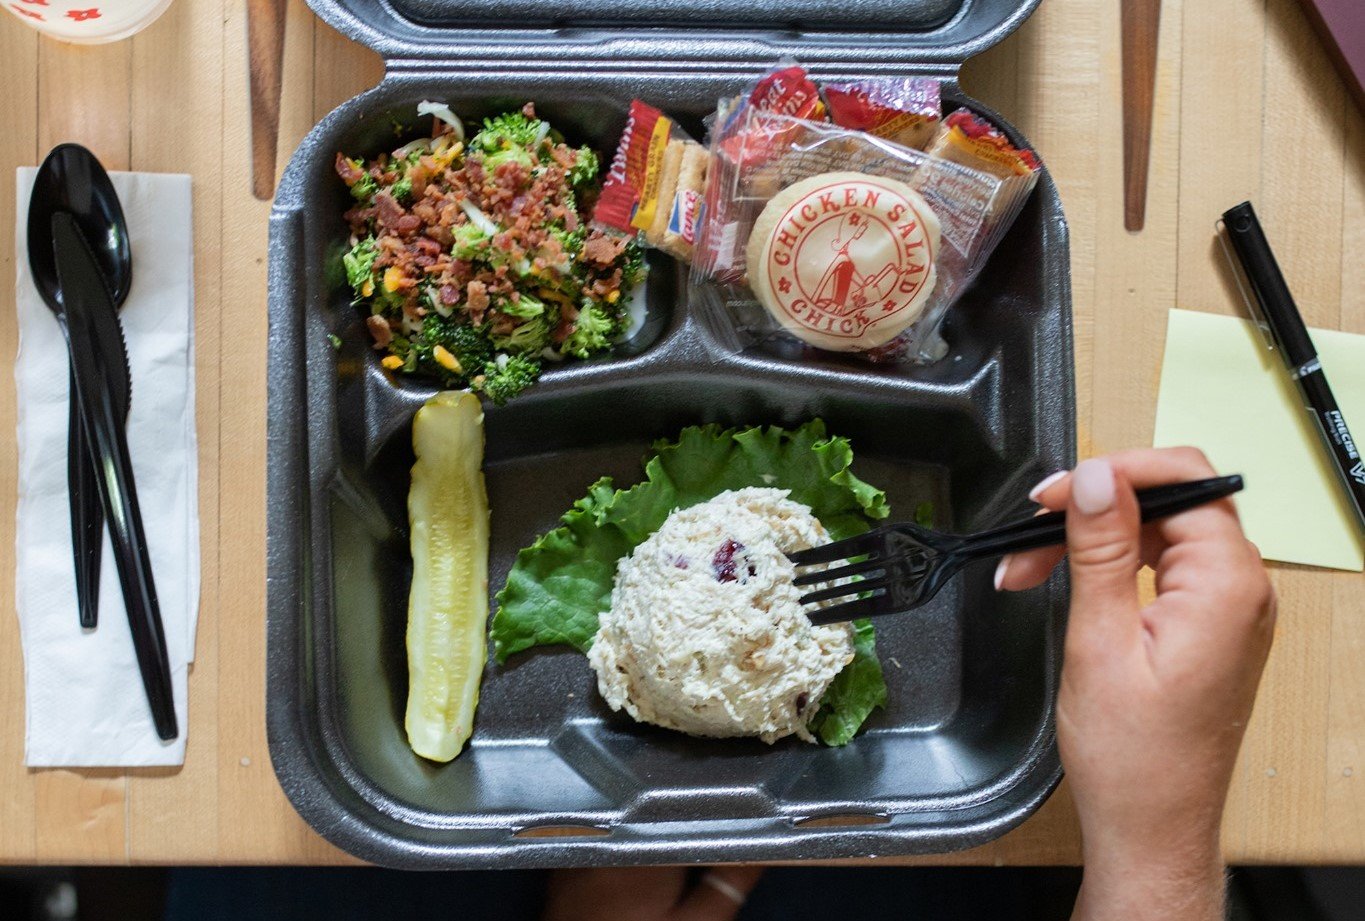 The Atlanta-based concept offers a variety of chicken salad dishes.